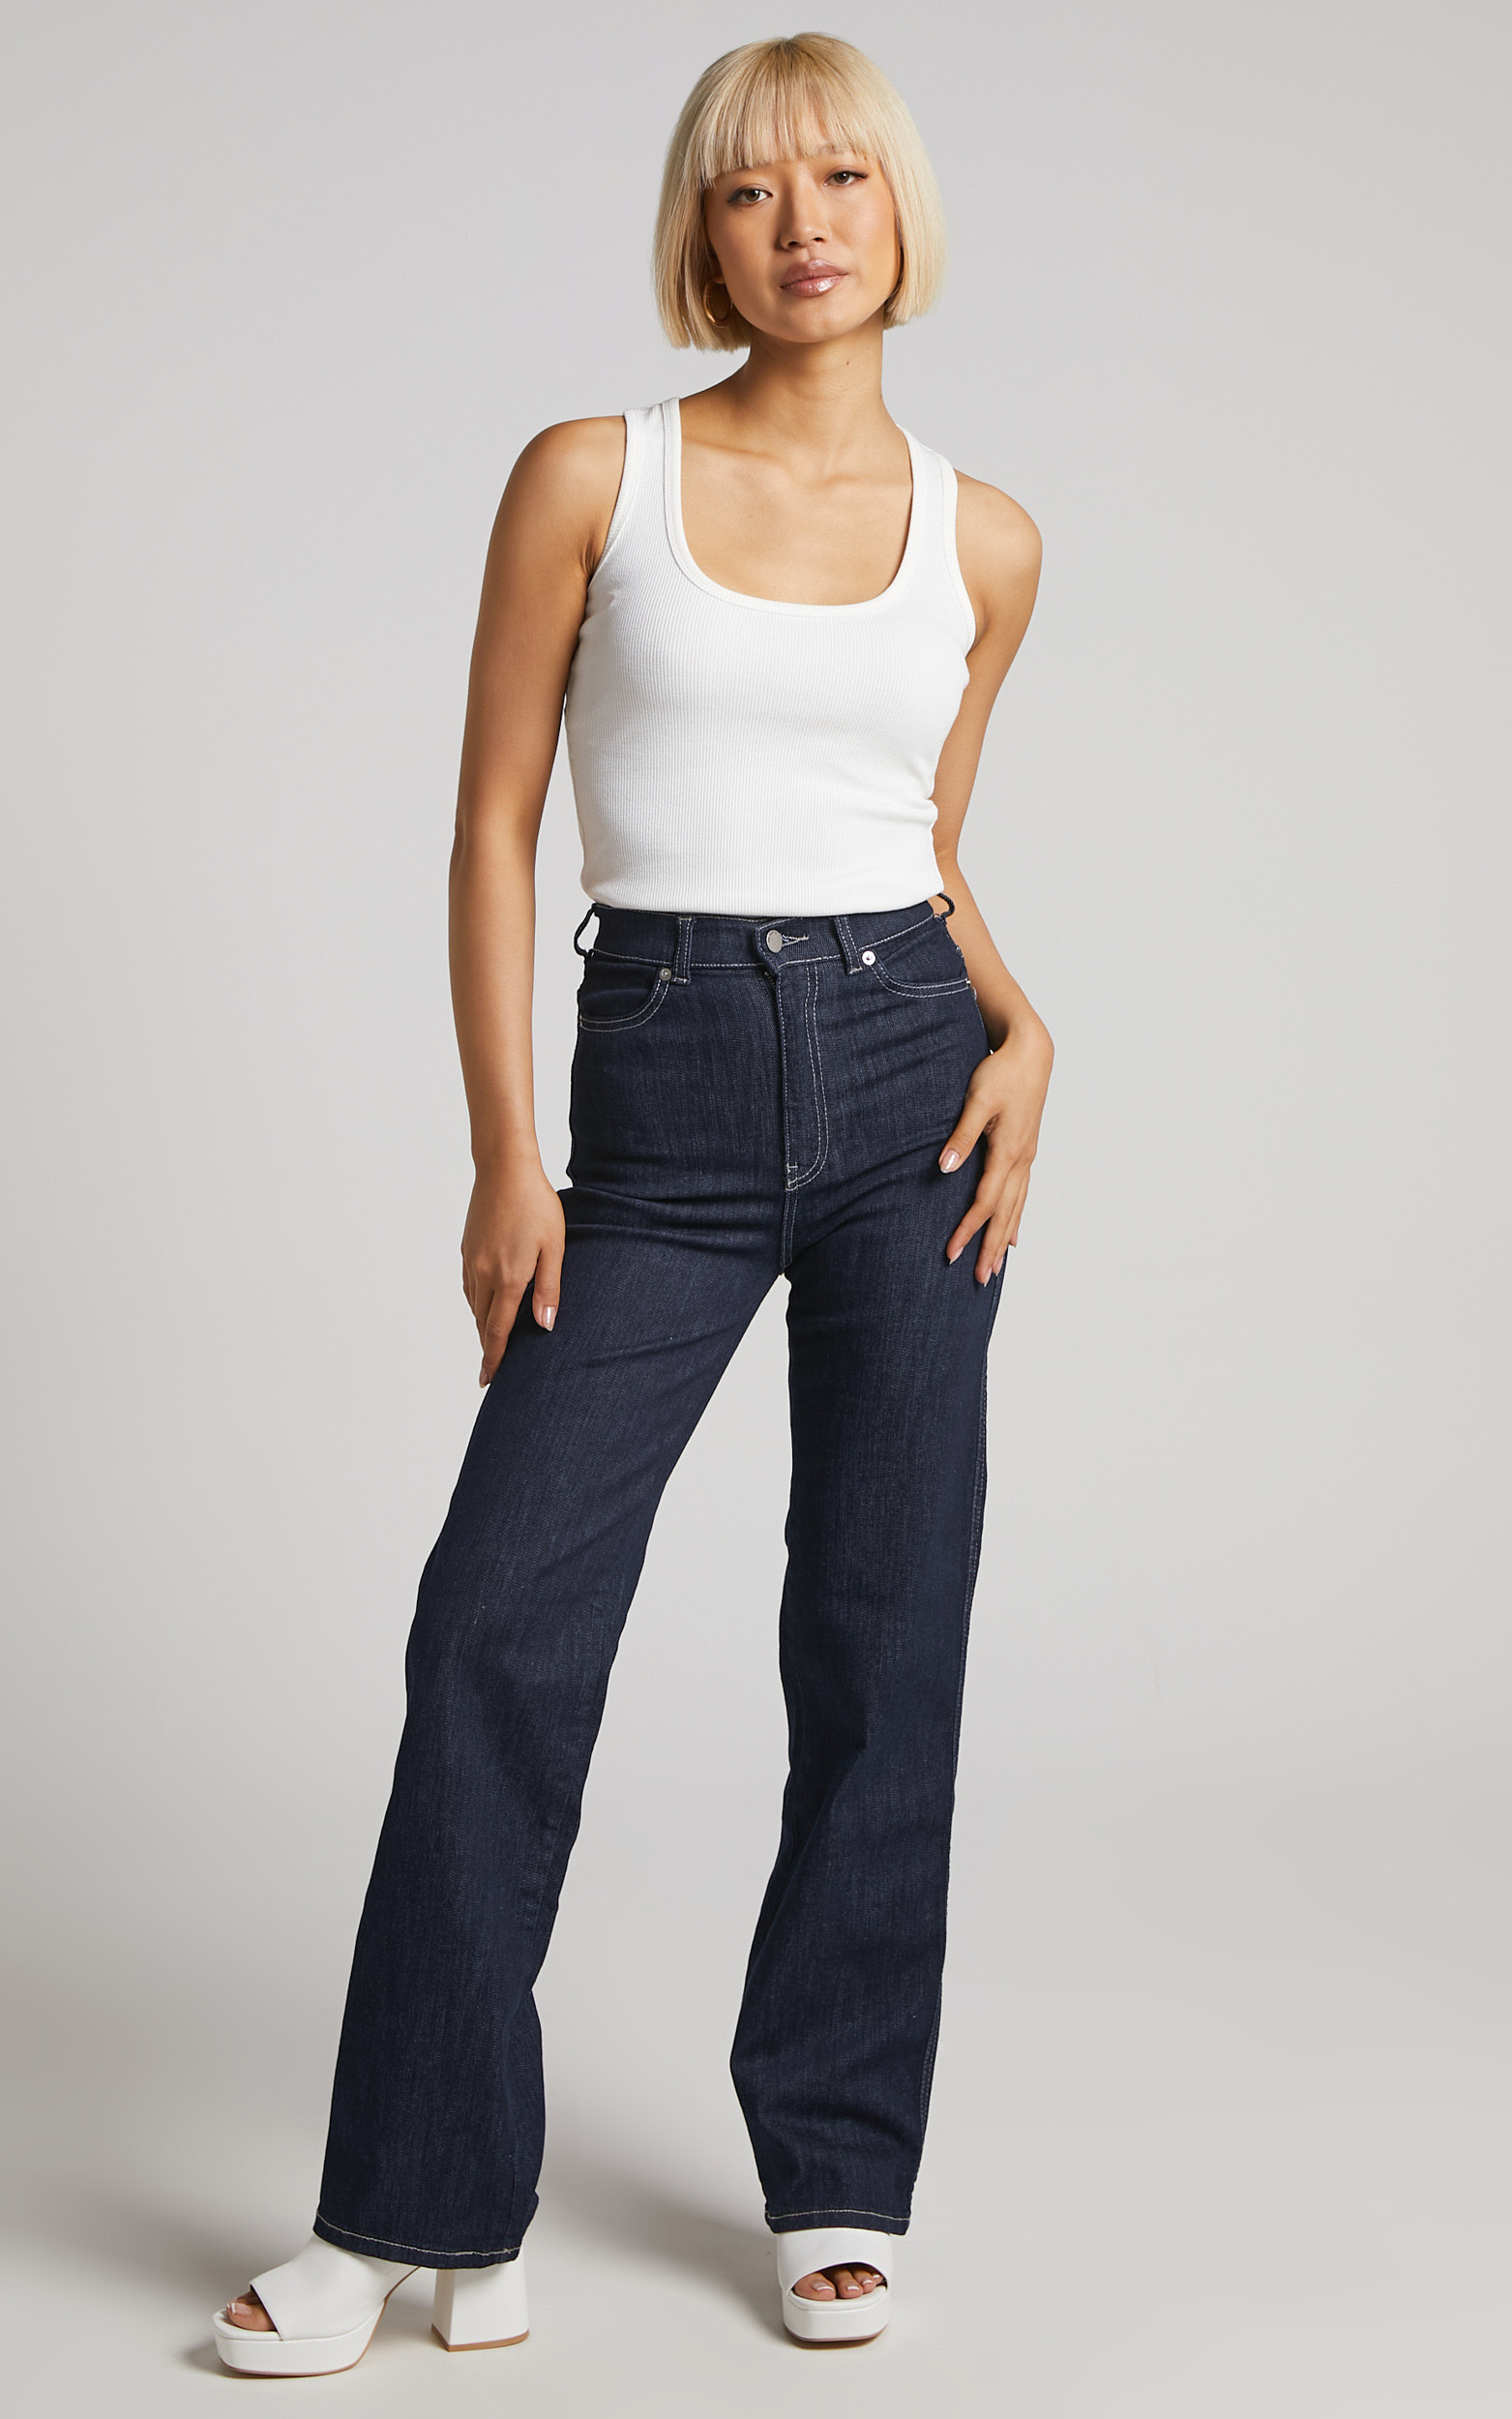 Dr Denim - Moxy Straight Jean in Pyke Blue Rinse - 06, NVY1, hi-res image number null